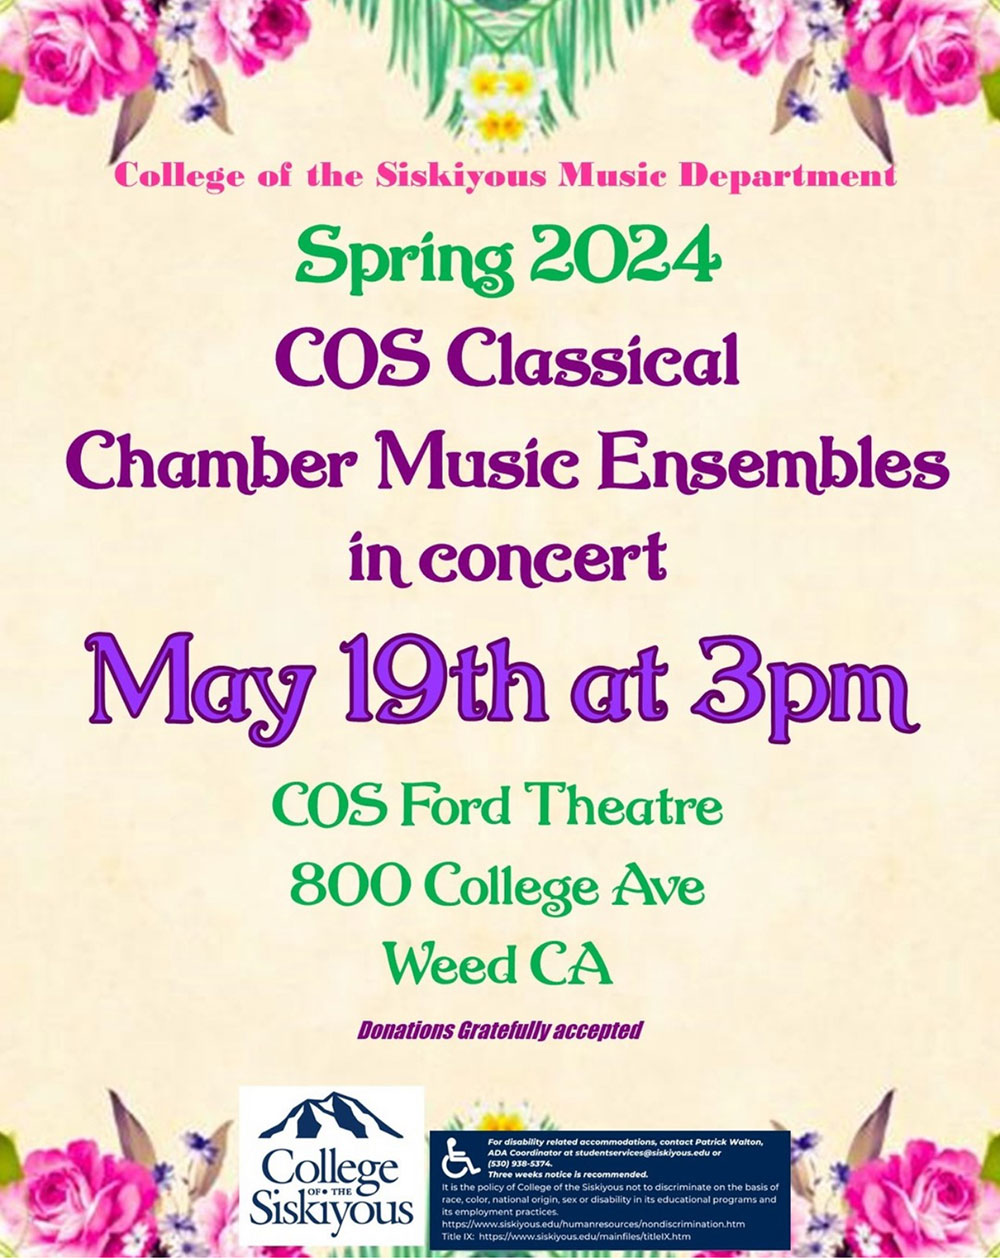 Spring 2024 COS Classical Chamber Music Ensembles in concert. May 19th at 3:00 pm. COS Ford Theatre. Donations gratefully accepted.